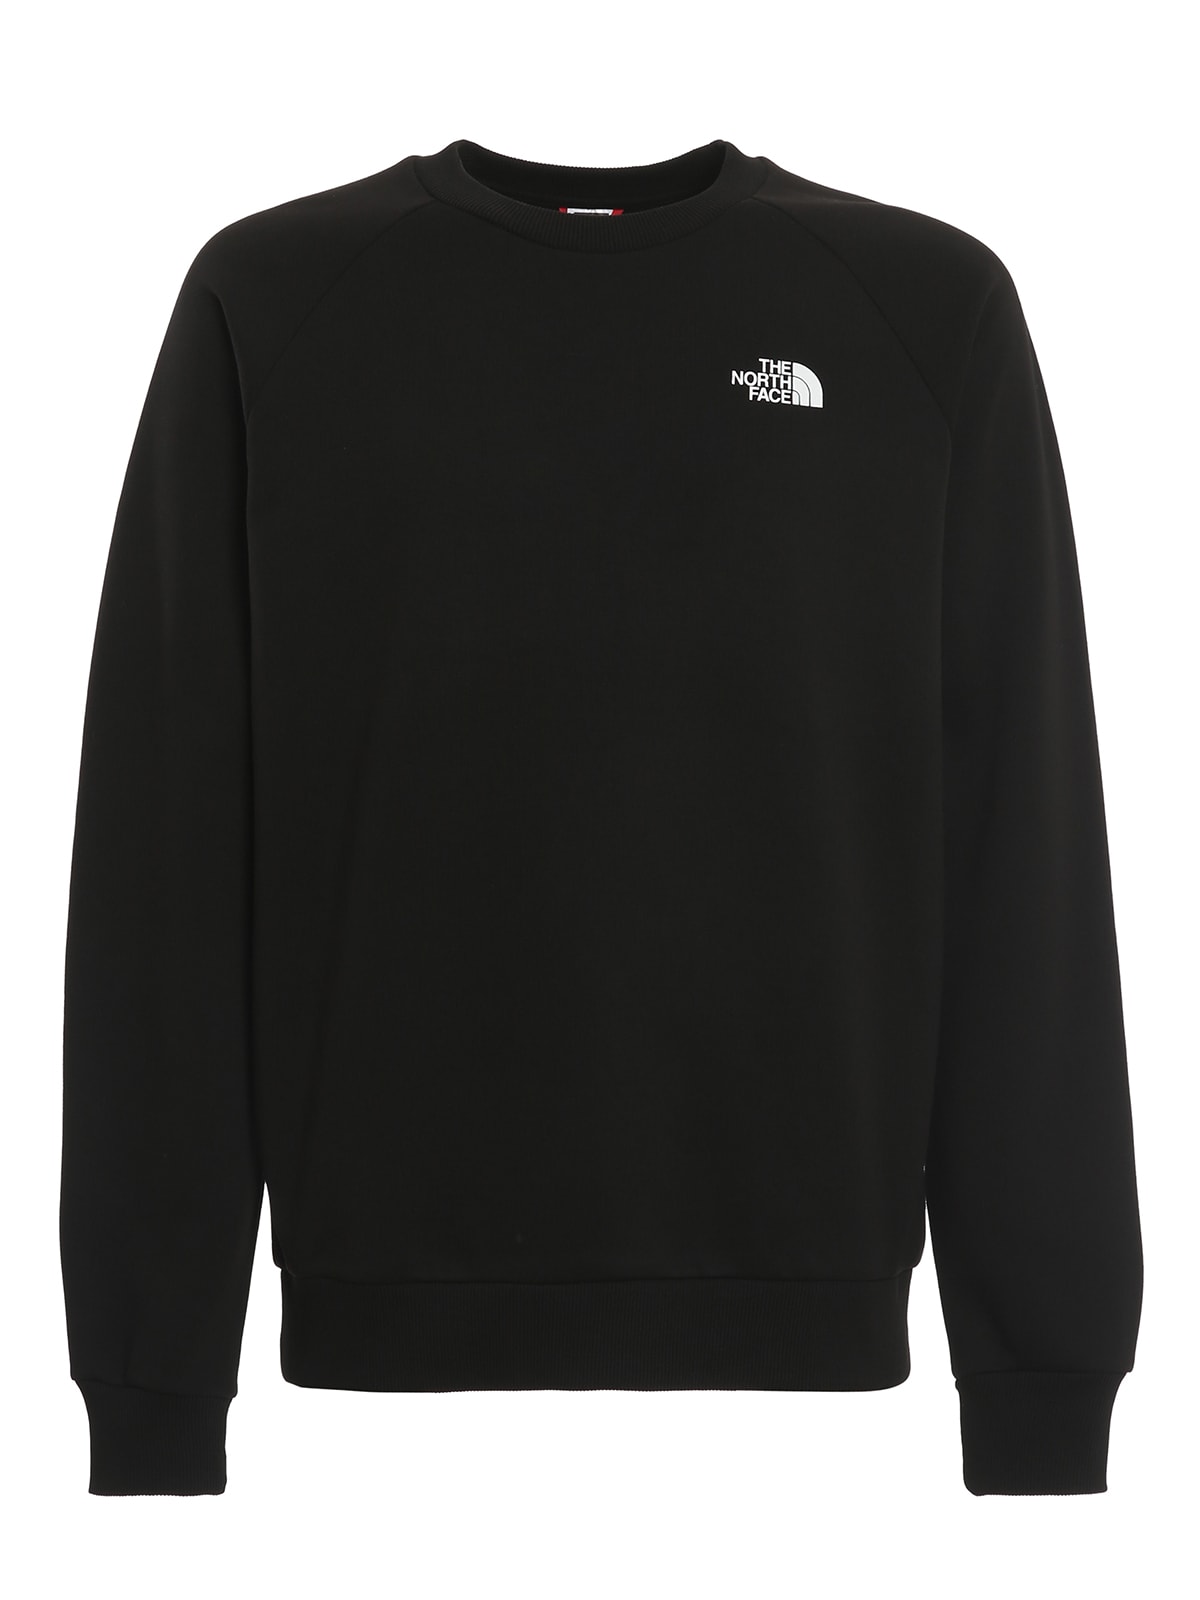 The North Face M Rag Redbx Crew New